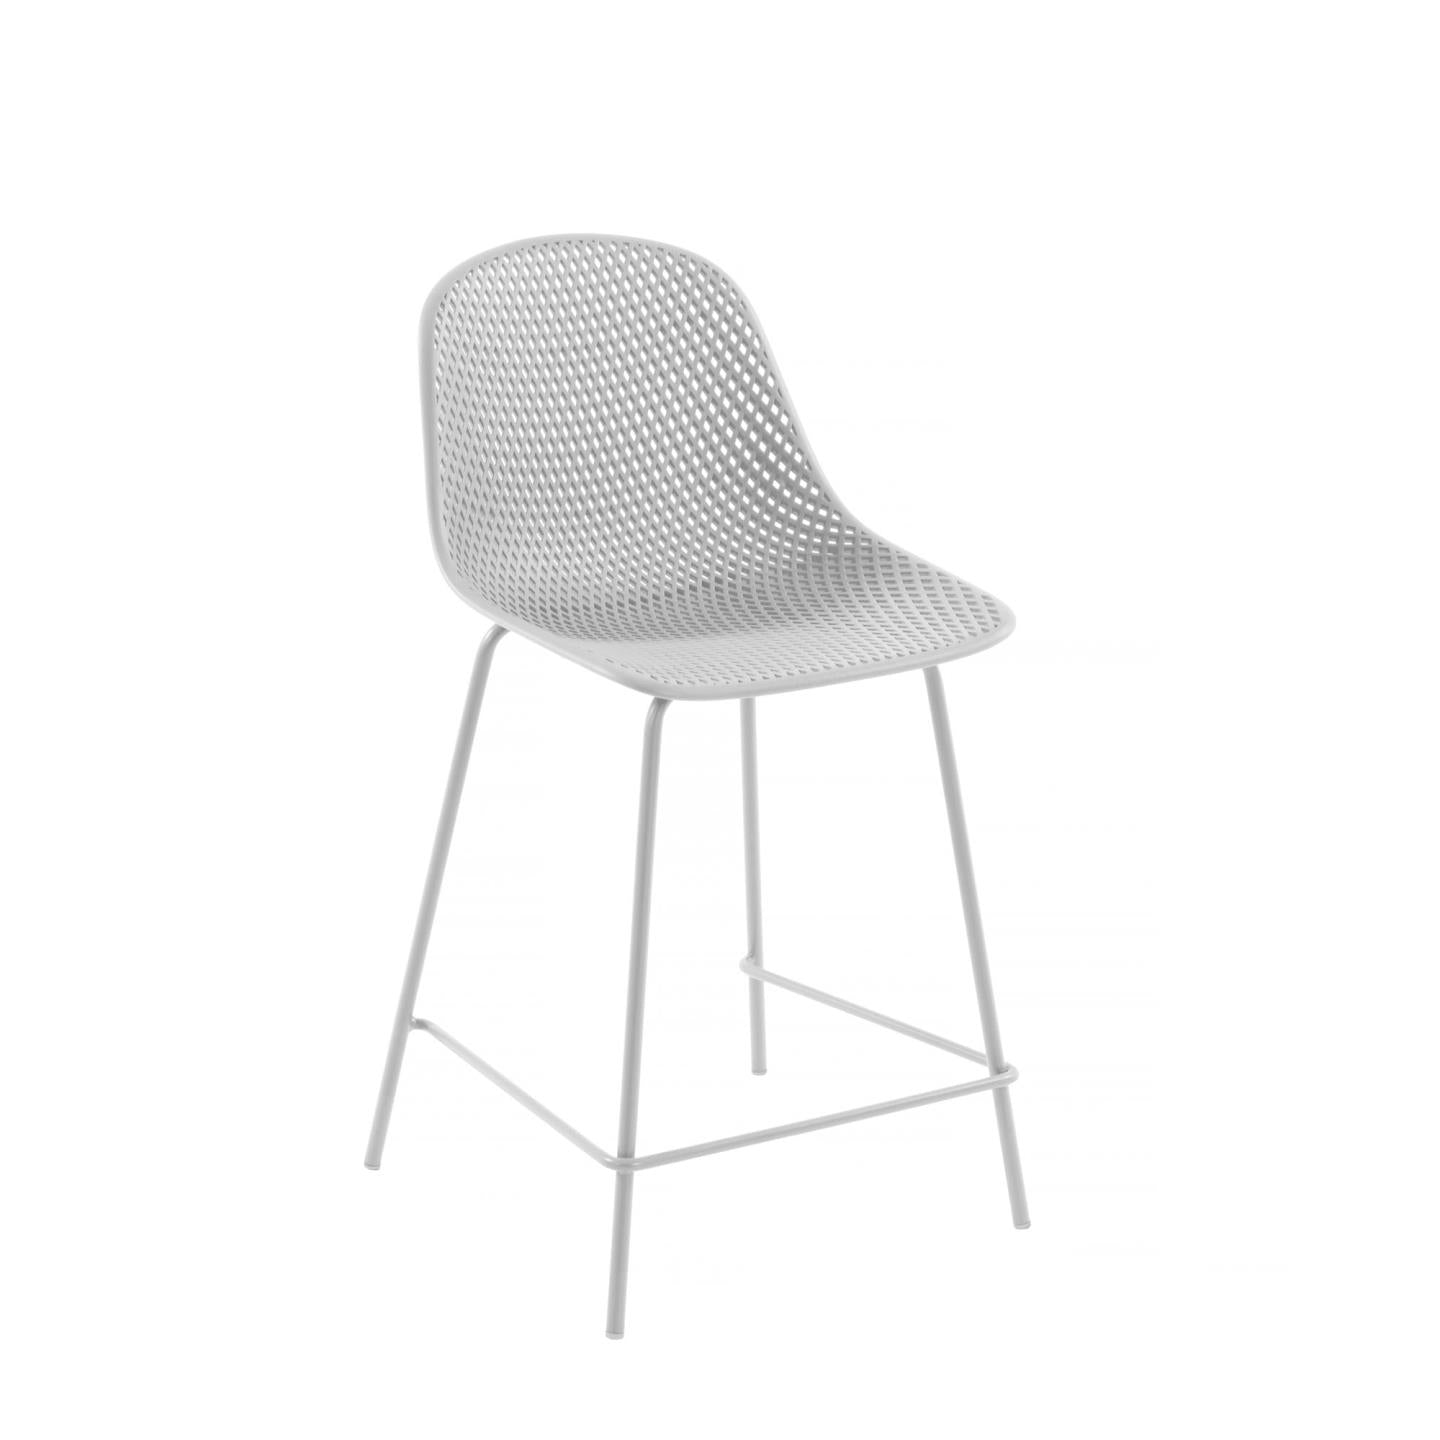 Quinby outdoor stool in white, height 65 cm